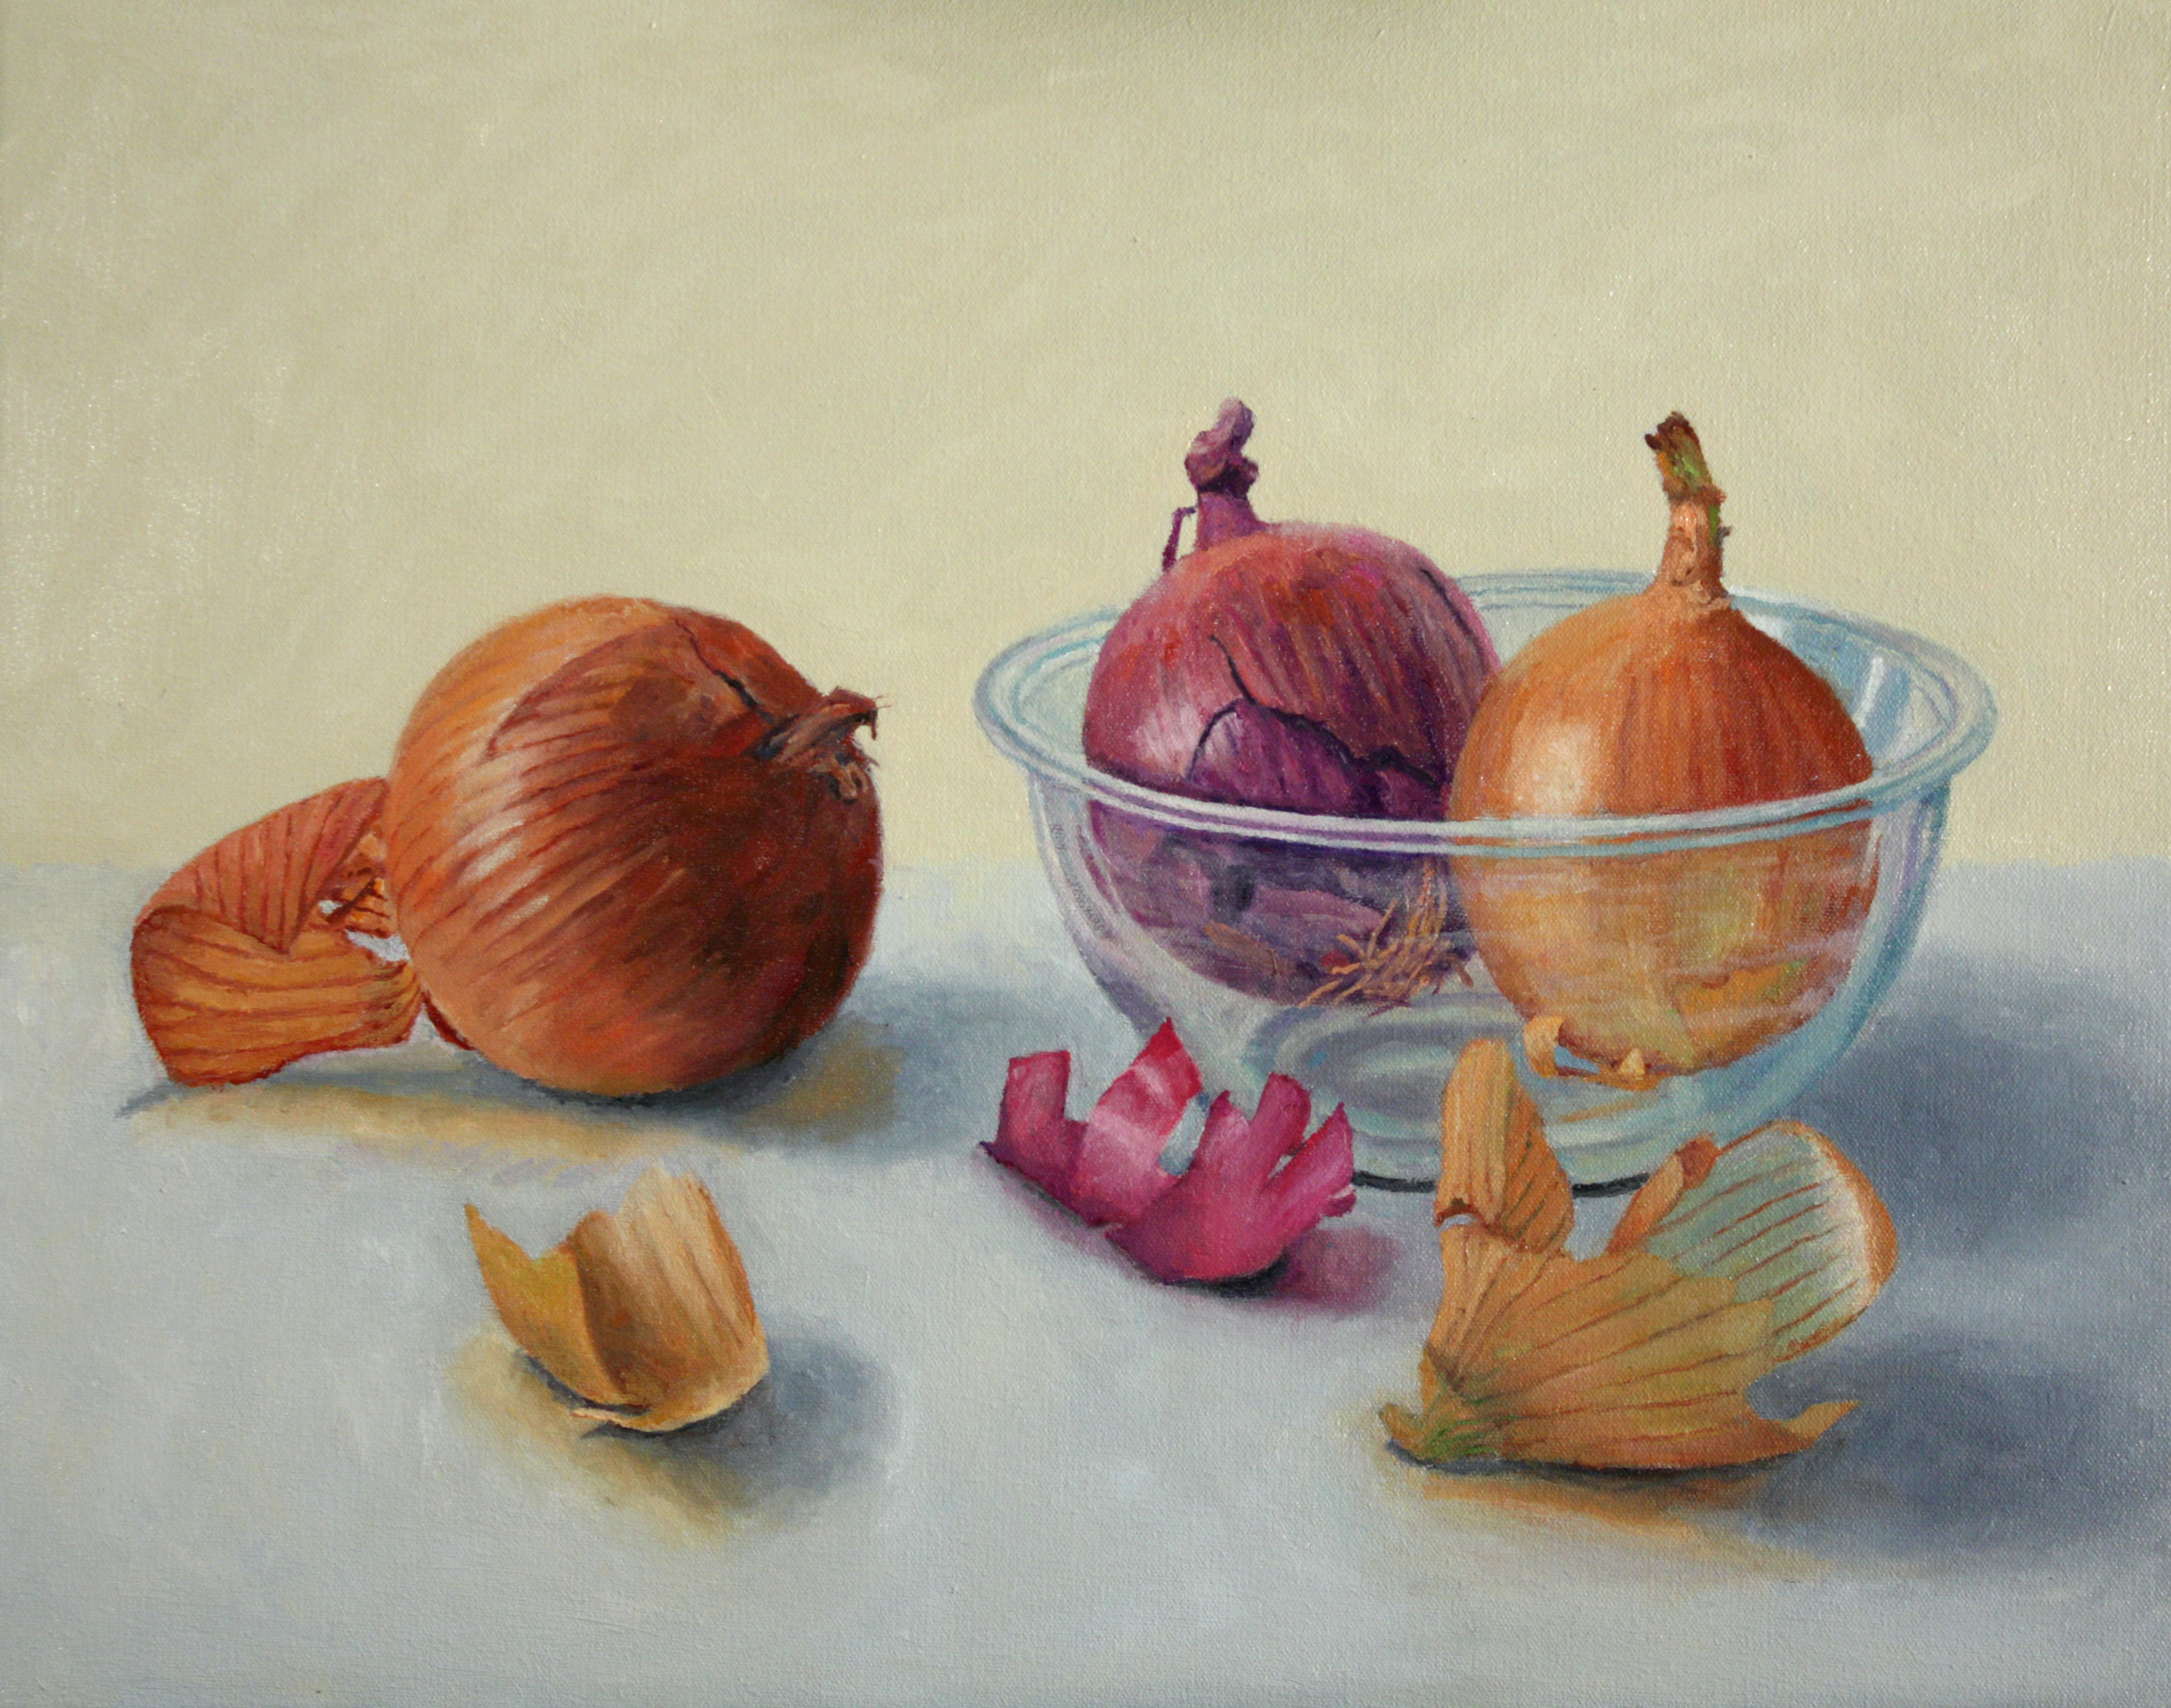 'ONIONS AND GLASS BOWL'